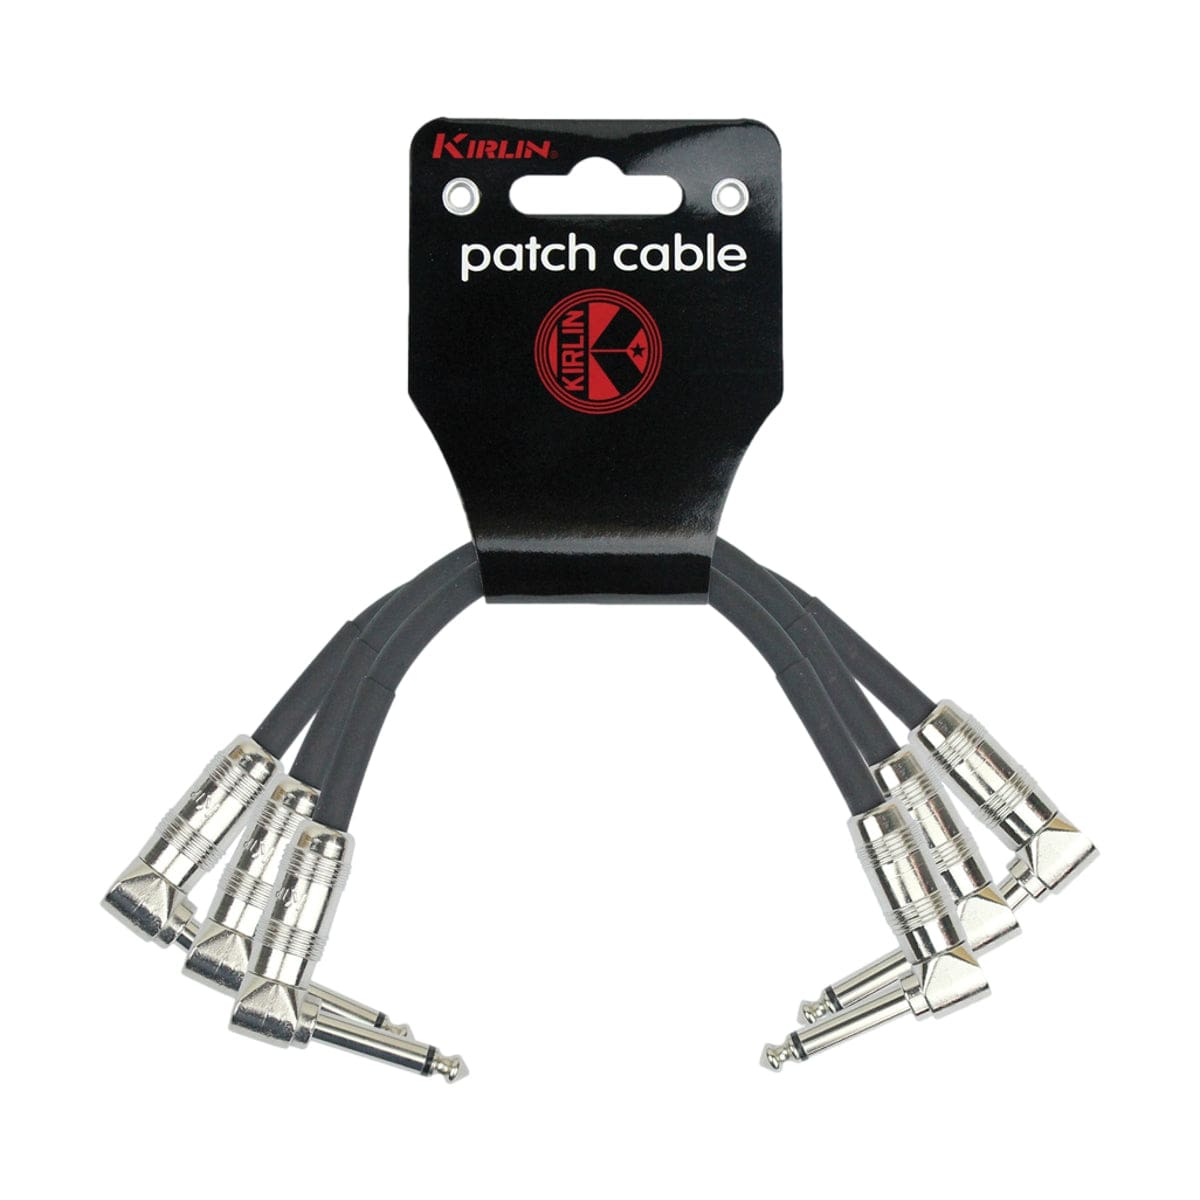 Kirlin Guitar Accessories Kirlin Patch Cable 1ft RA-RA 3-Pack KIP3243-1 - Byron Music